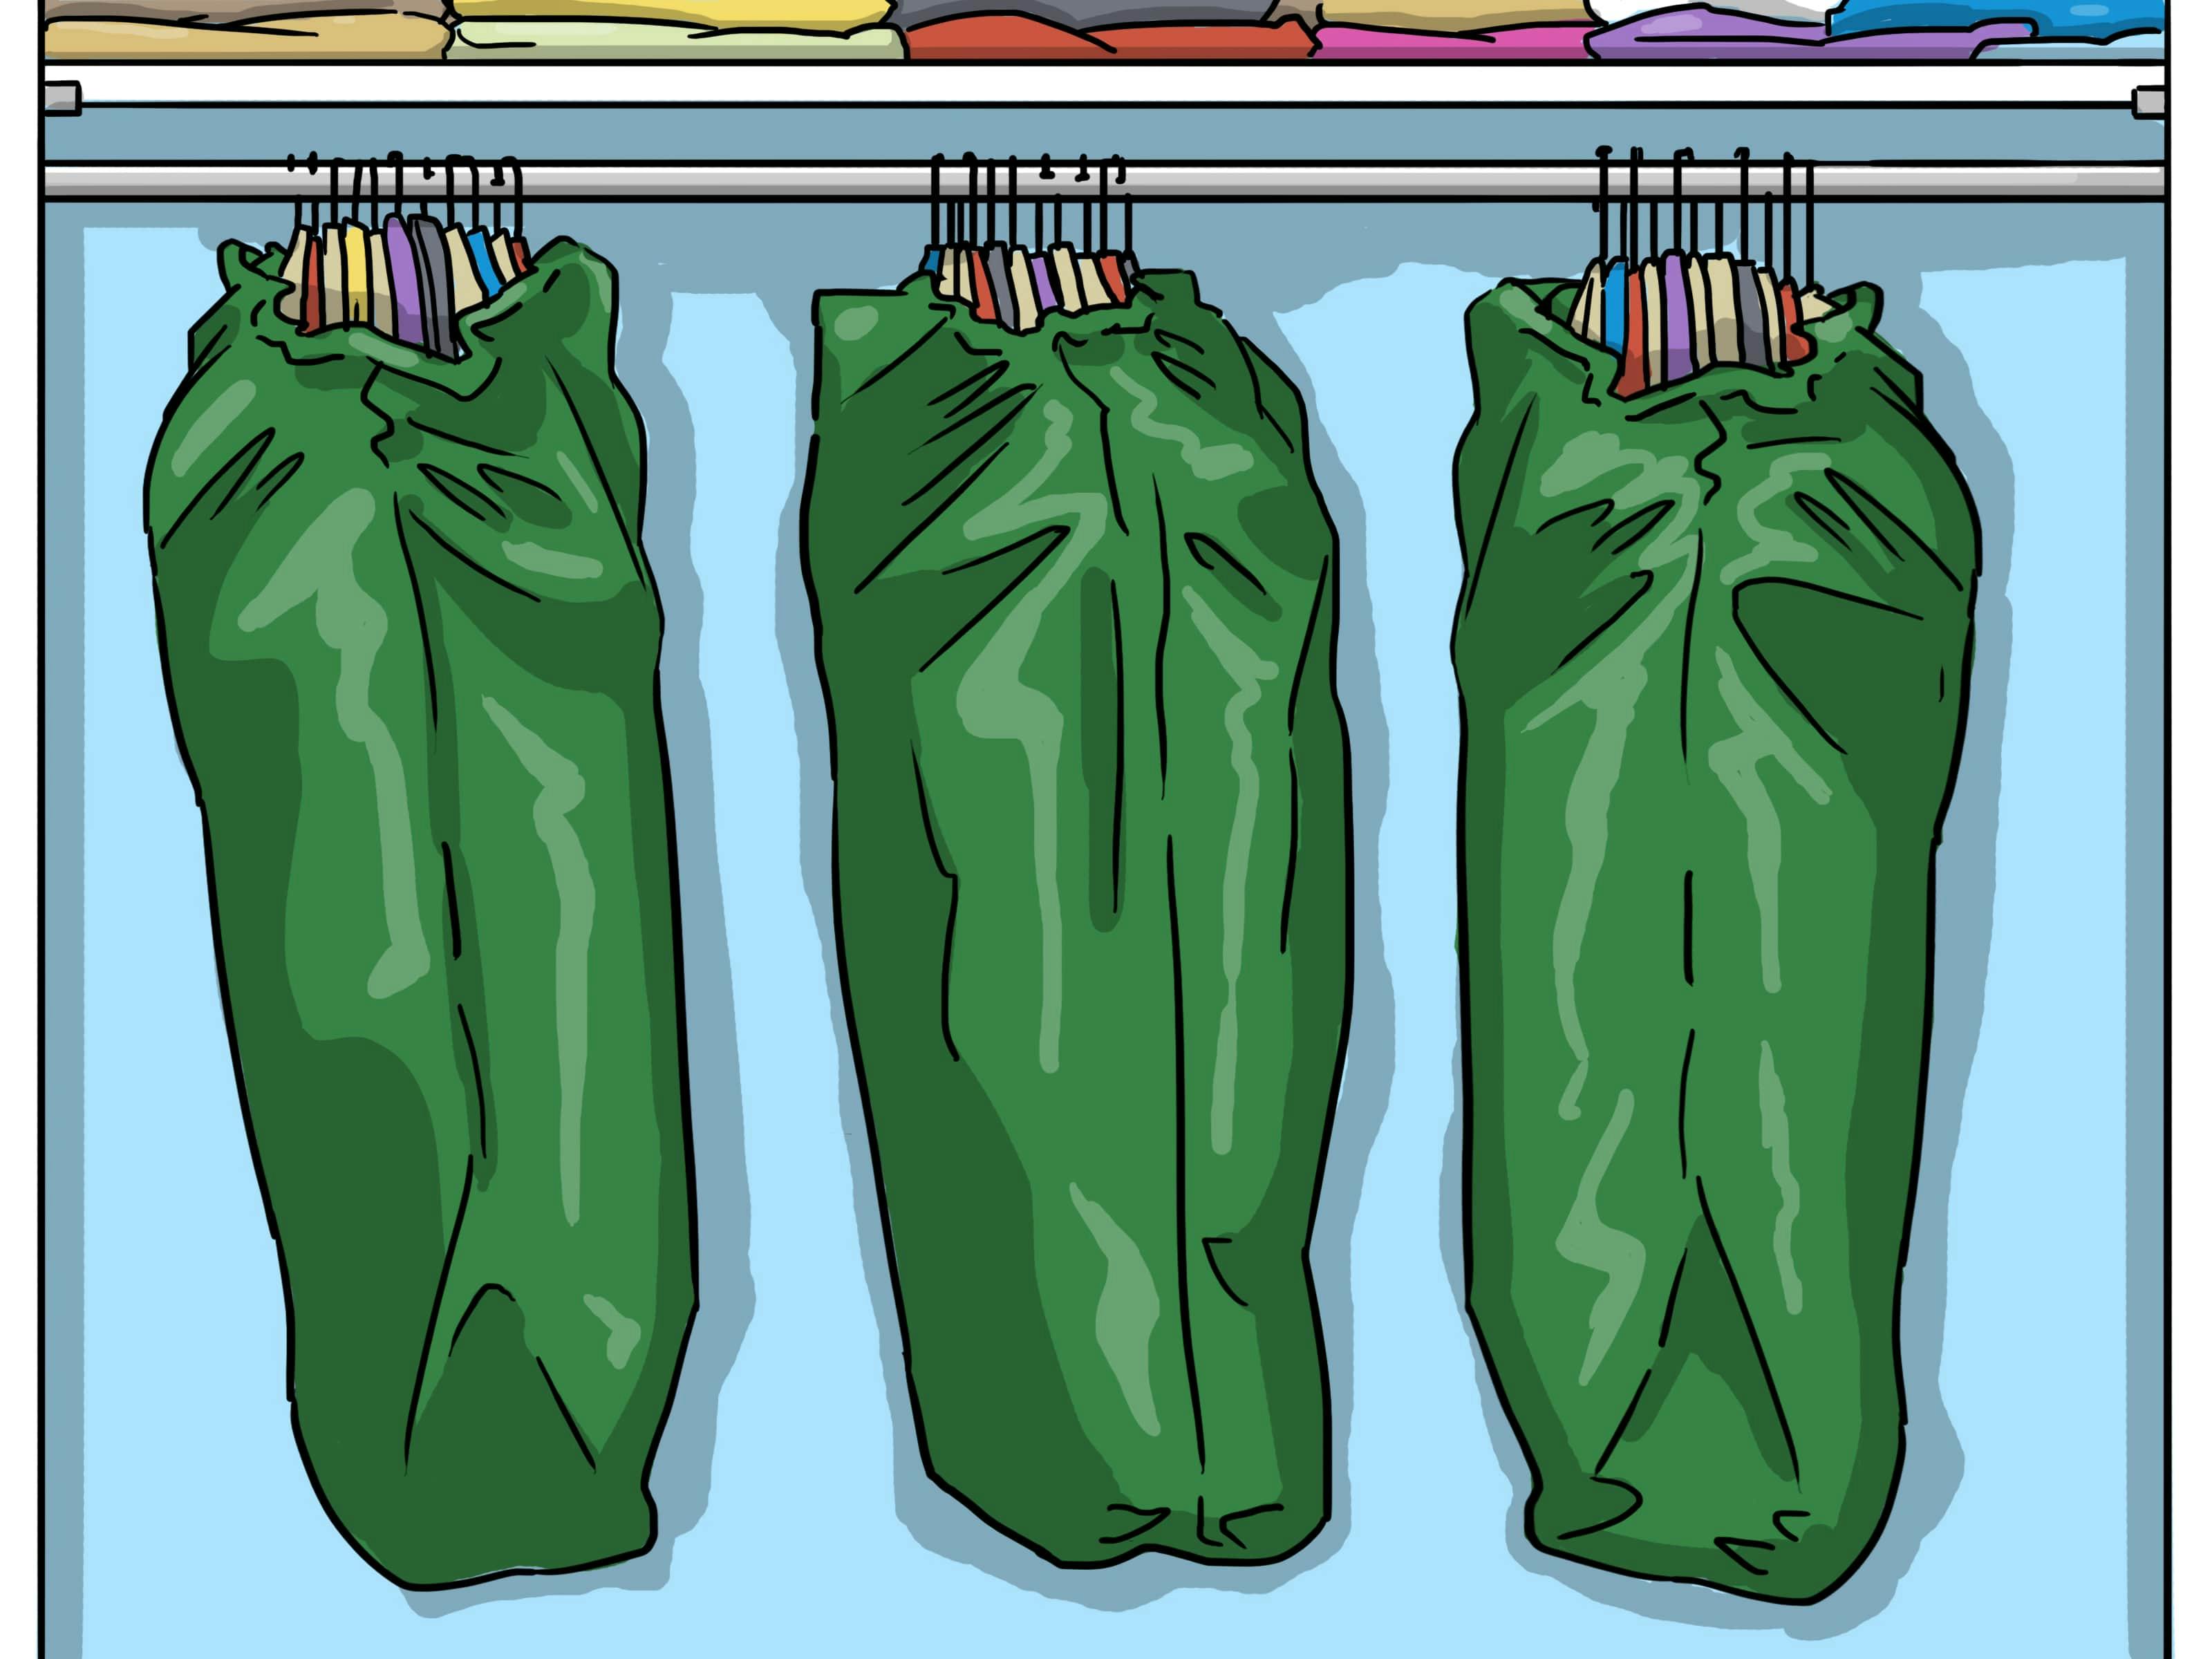 60 gallon garbage bags can "wrap" your clothes and simplify your move.